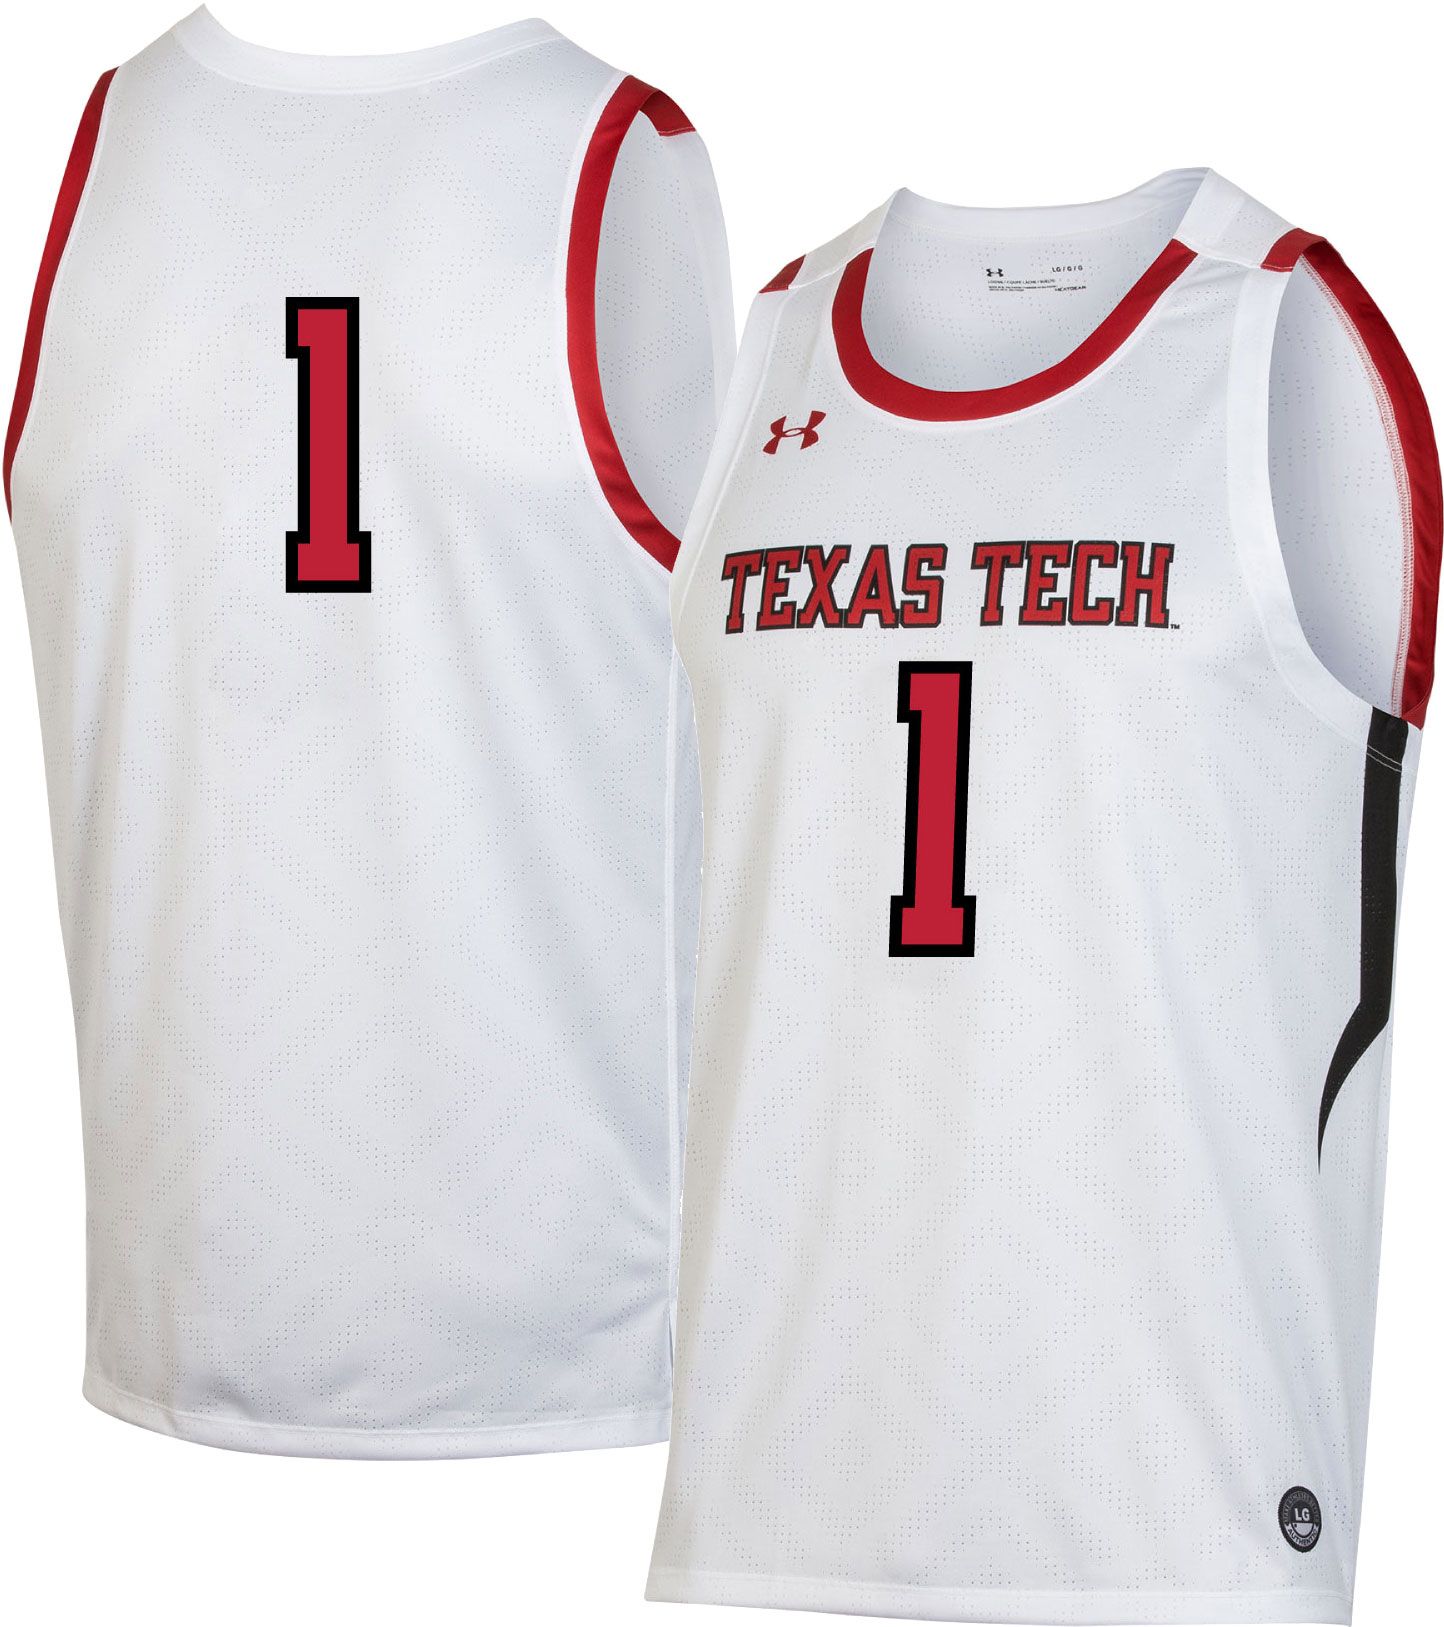 basketball jersey white and red